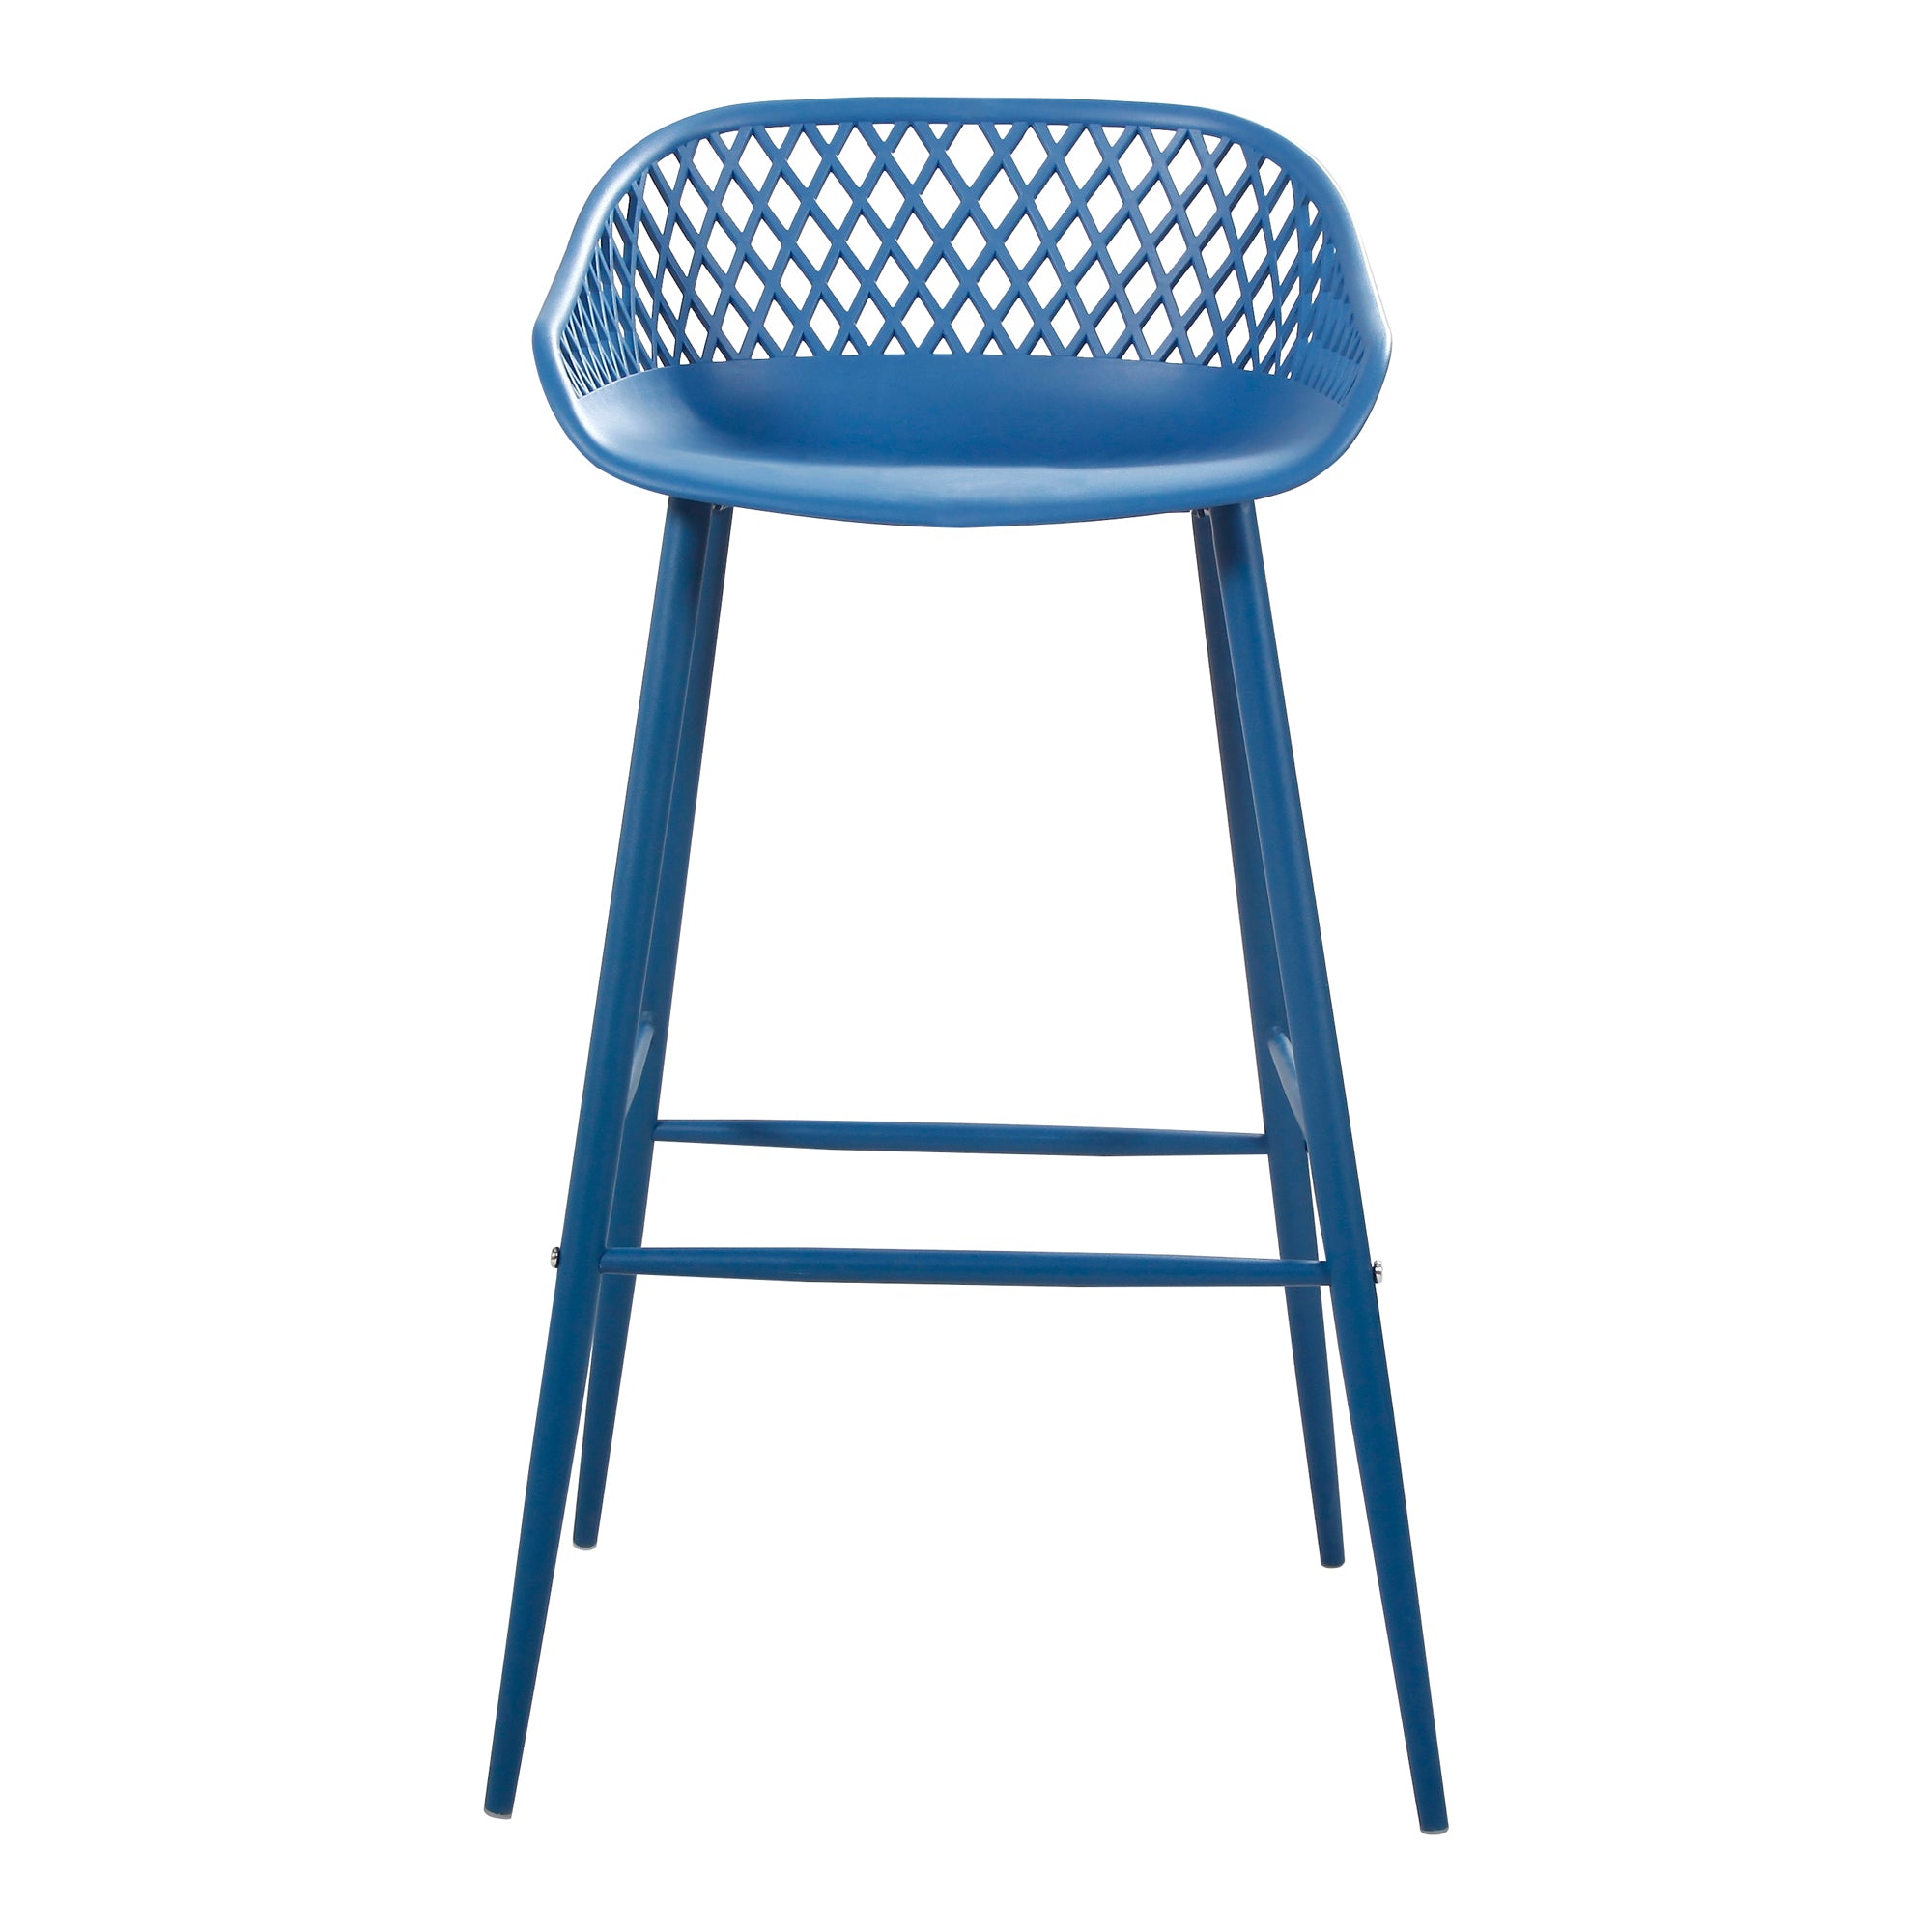 Piazza Outdoor Barstool Blue - Set Of Two